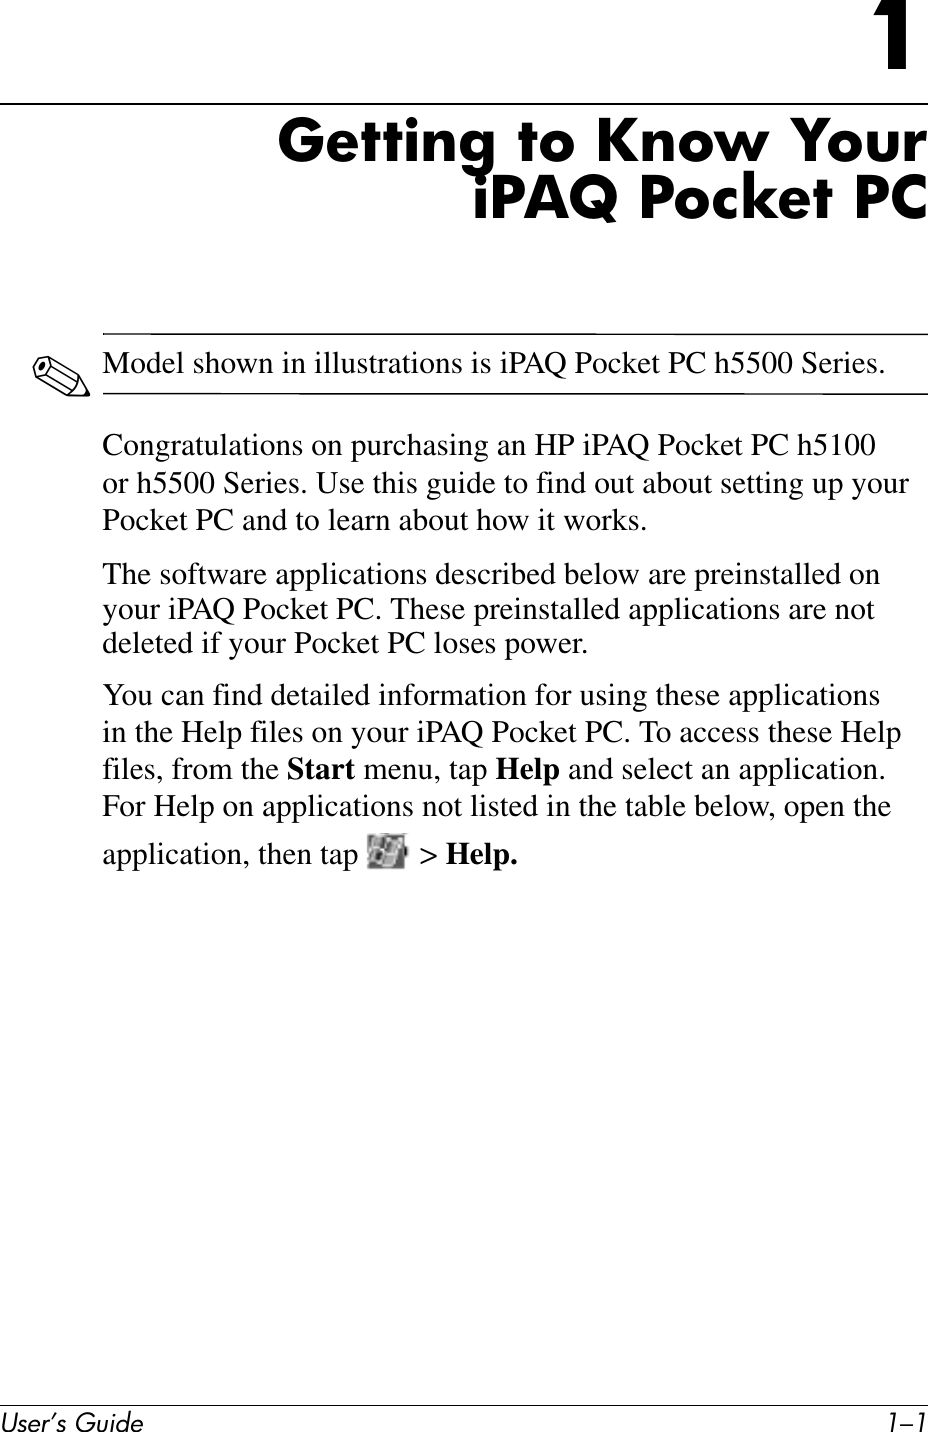 User’s Guide 1–11Getting to Know YouriPAQ Pocket PC✎Model shown in illustrations is iPAQ Pocket PC h5500 Series.Congratulations on purchasing an HP iPAQ Pocket PC h5100 or h5500 Series. Use this guide to find out about setting up your Pocket PC and to learn about how it works.The software applications described below are preinstalled on your iPAQ Pocket PC. These preinstalled applications are not deleted if your Pocket PC loses power.You can find detailed information for using these applications in the Help files on your iPAQ Pocket PC. To access these Help files, from the Start menu, tap Help and select an application. For Help on applications not listed in the table below, open the application, then tap   &gt; Help.